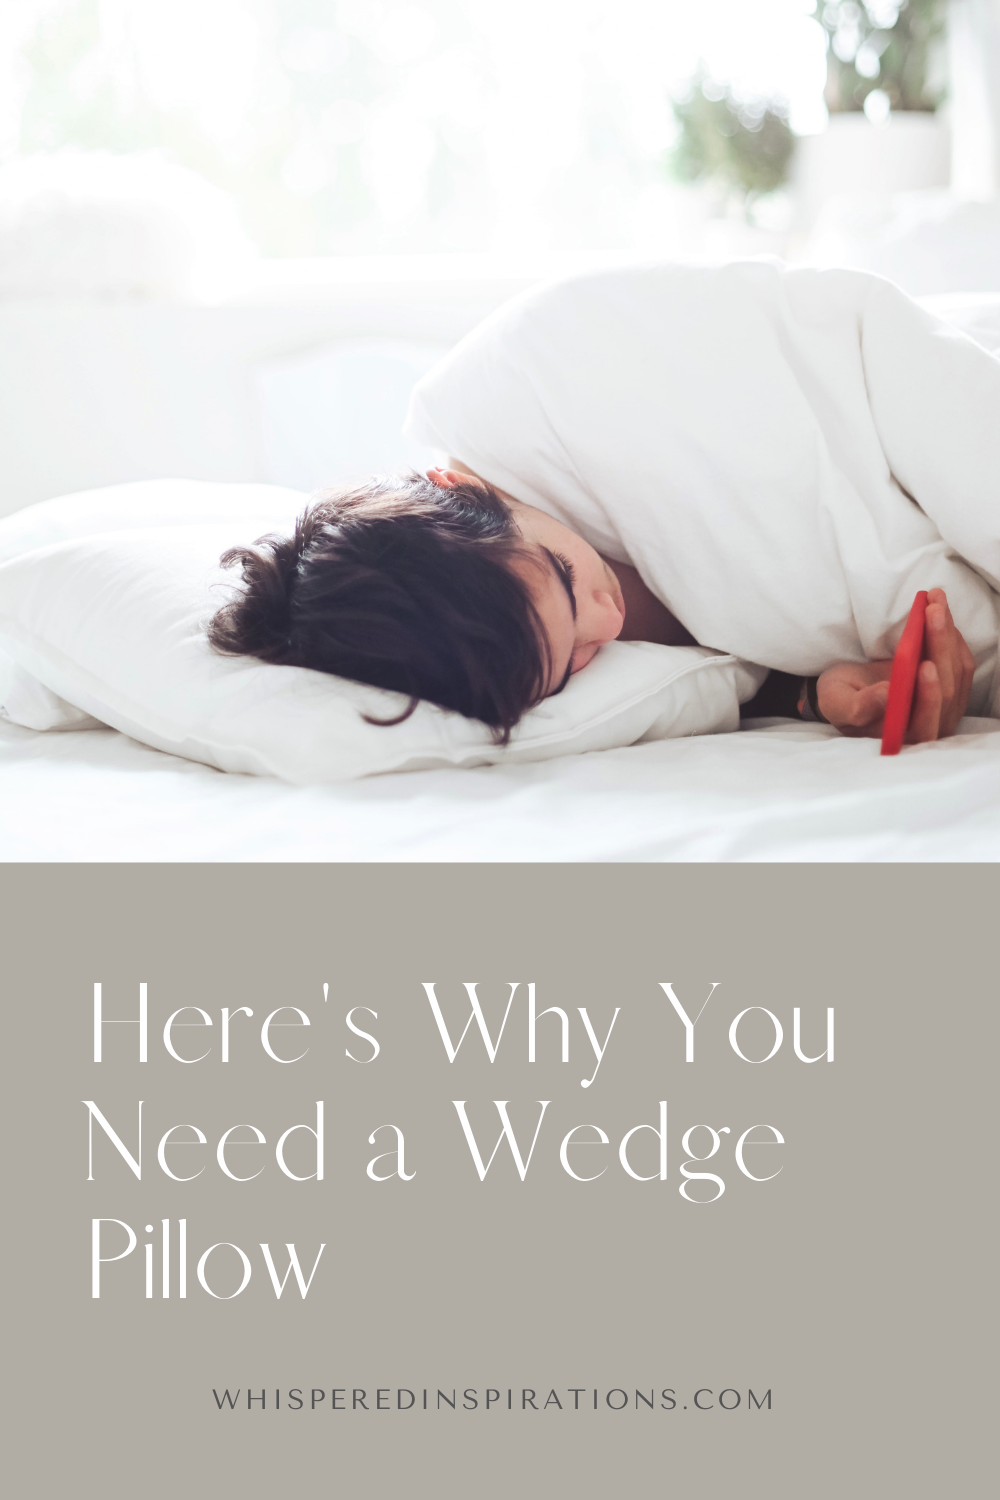 Woman on her phone laying down in bed. The sheets are white and there is a plant behind her. This article covers why you need a wedge pillow.